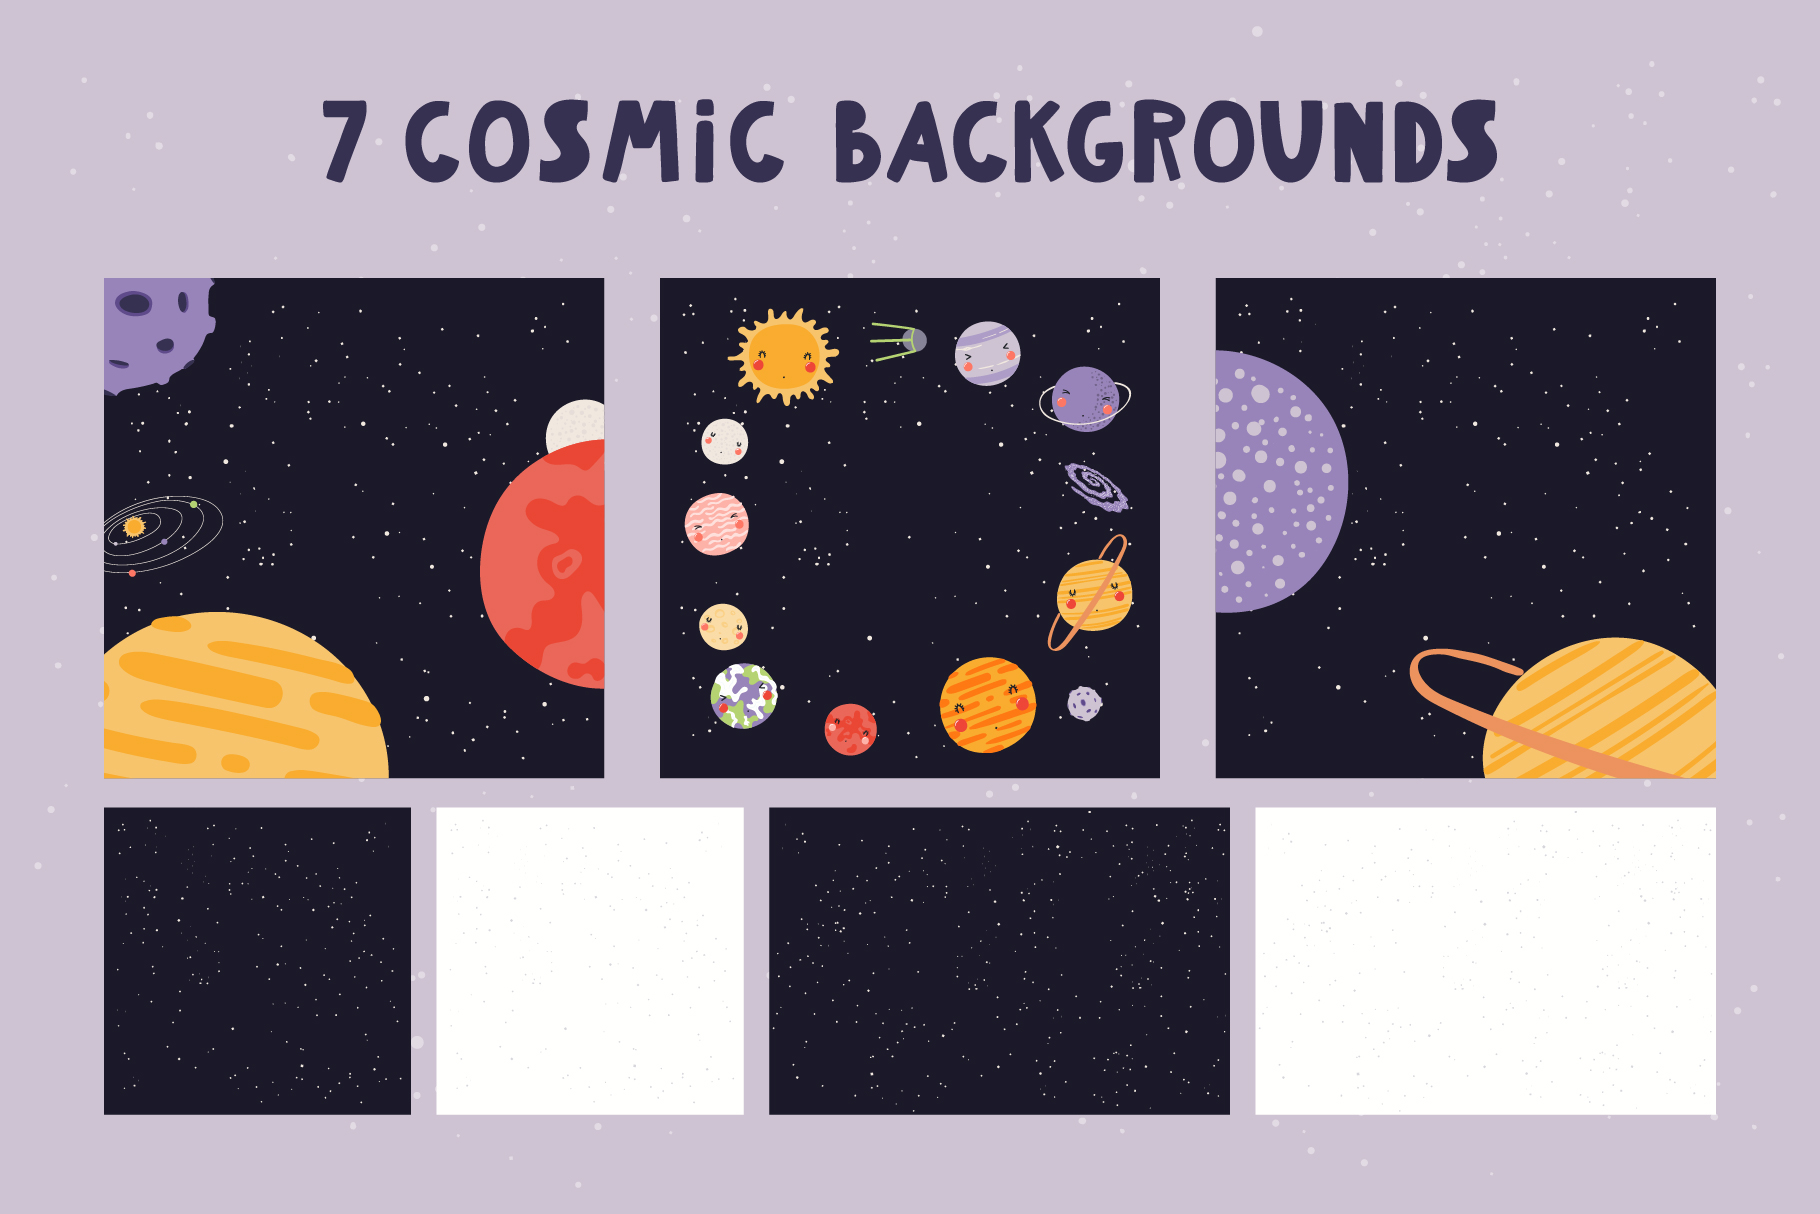 Space backdrops for your images.